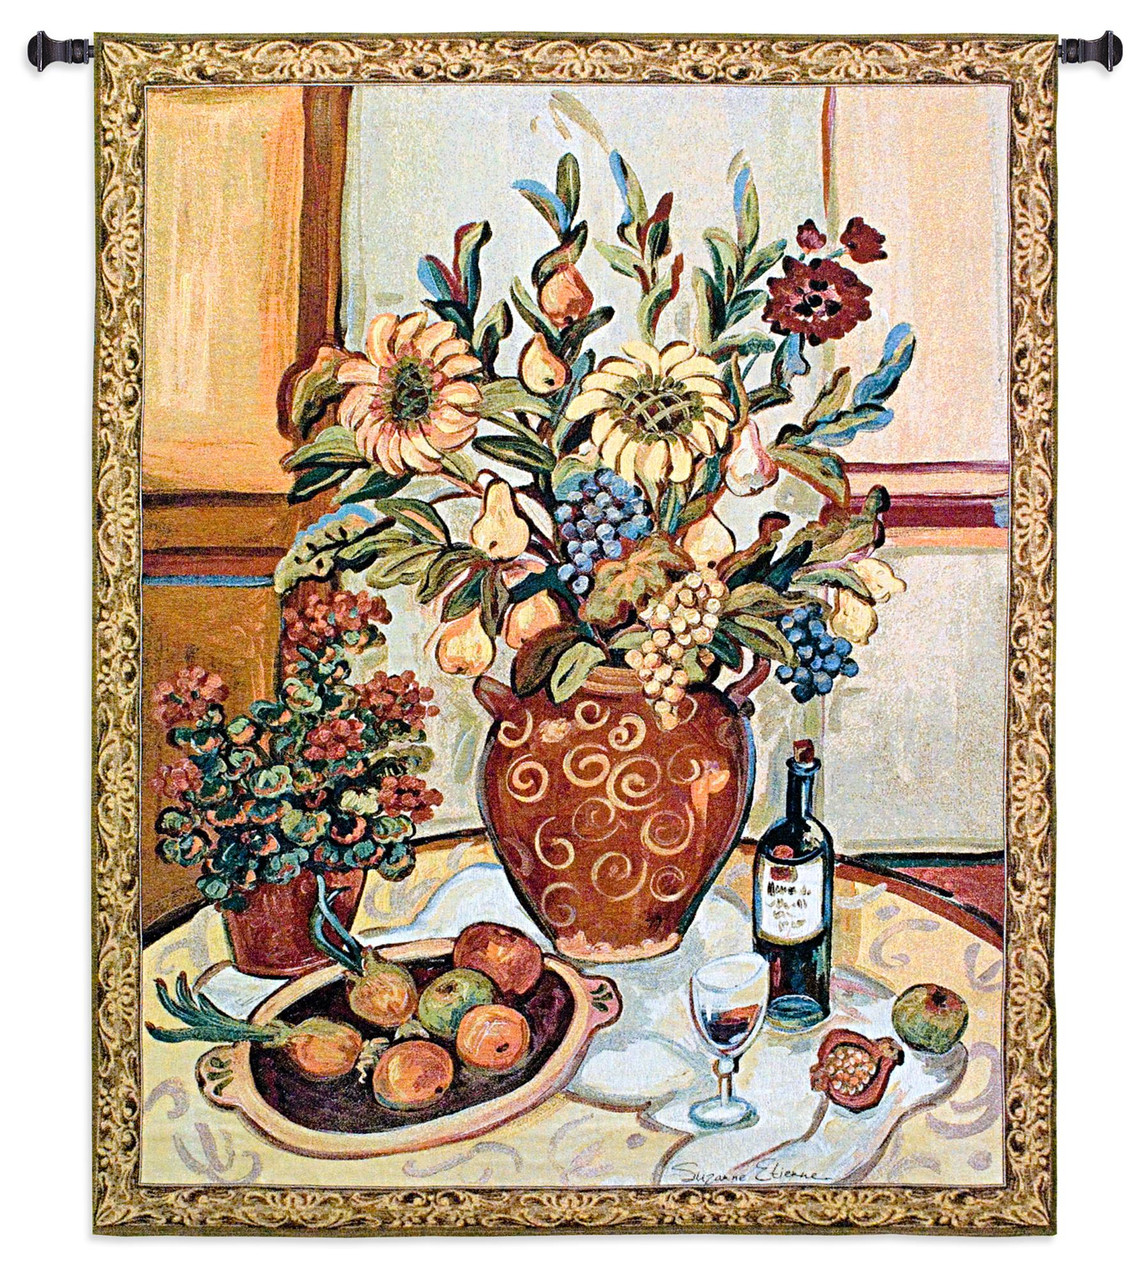 Tapestry fabric Vase and Fruit Woven in France. 